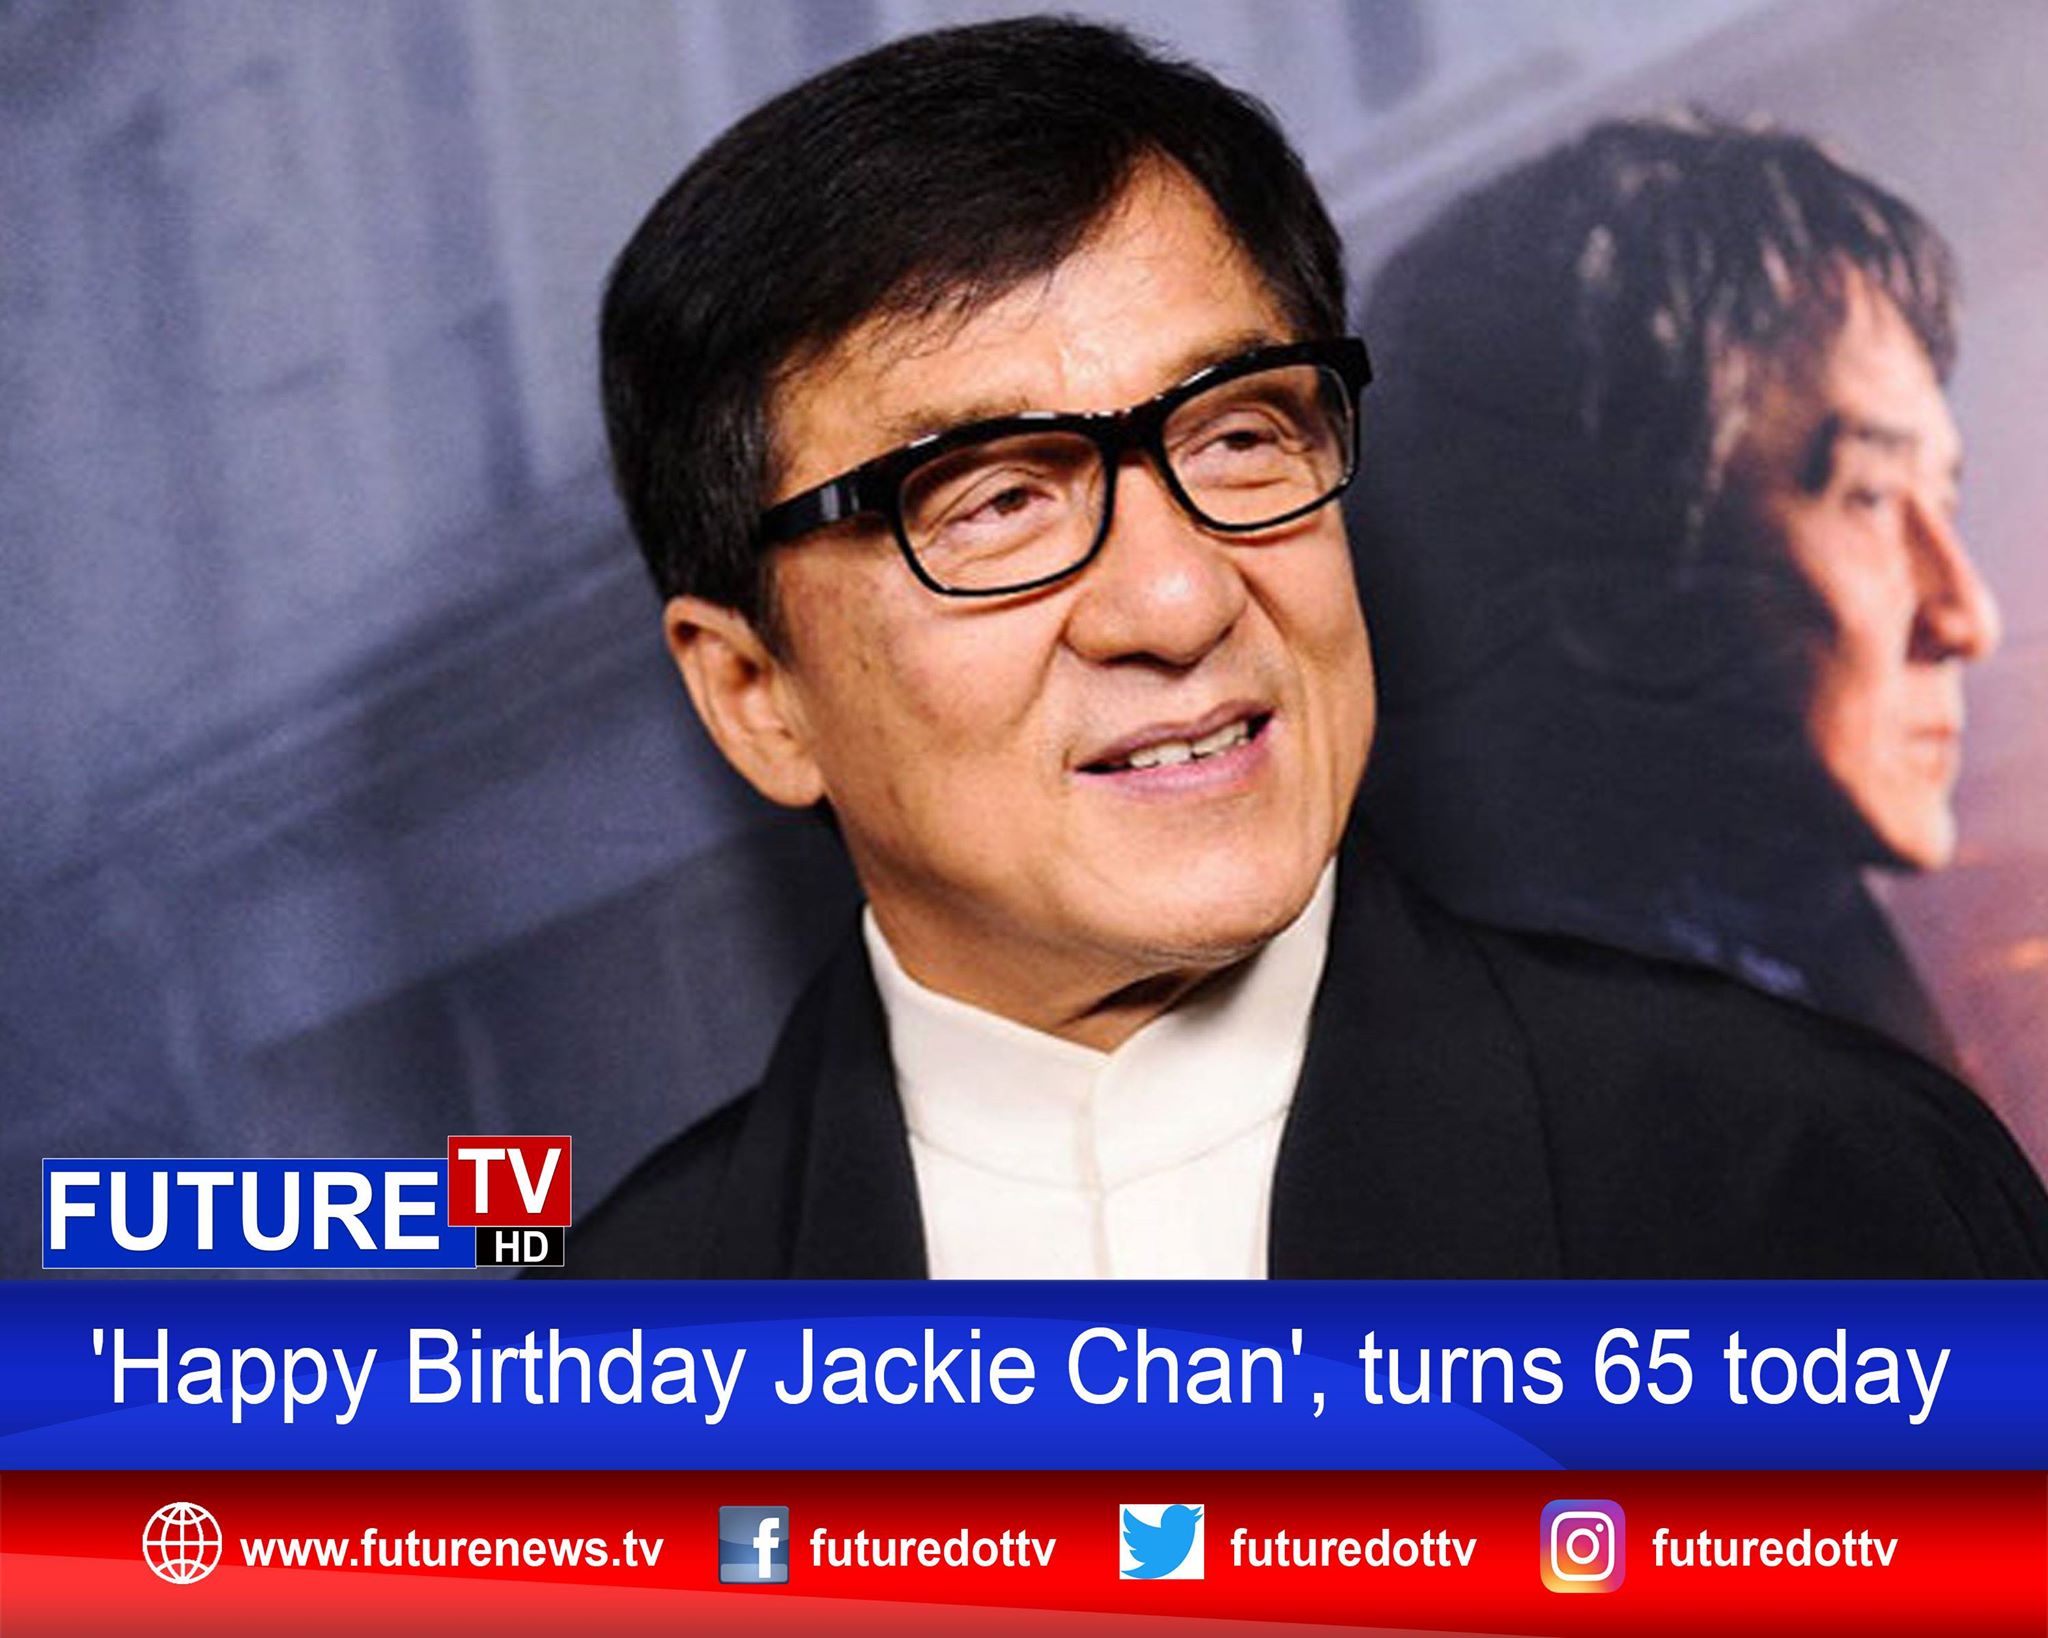 \Happy Birthday Jackie Chan\, turns 65 today
Read More :   